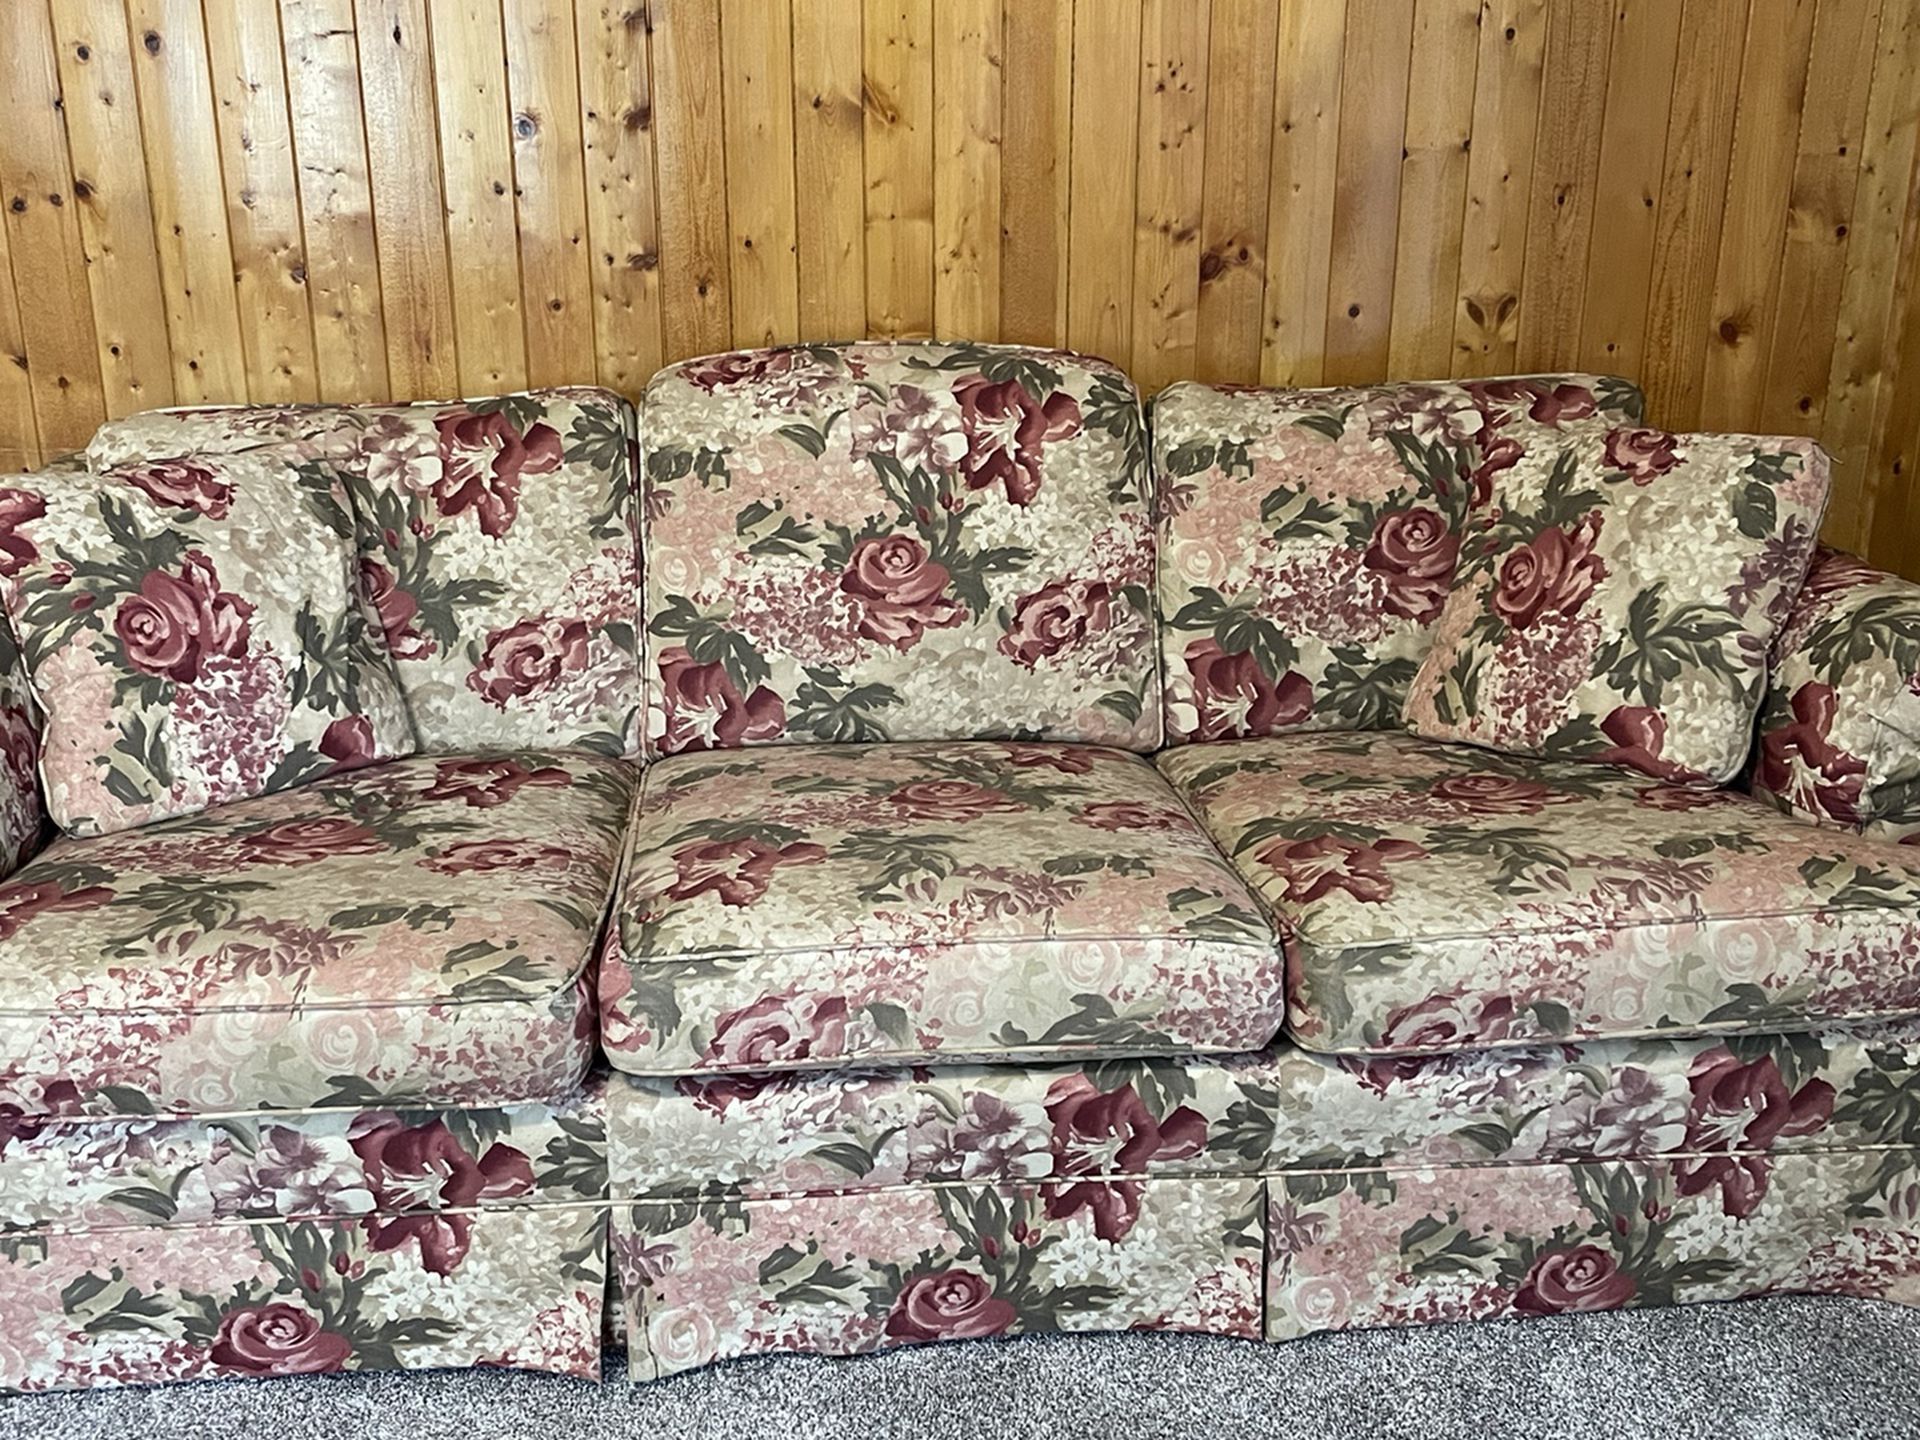 FREE Couch